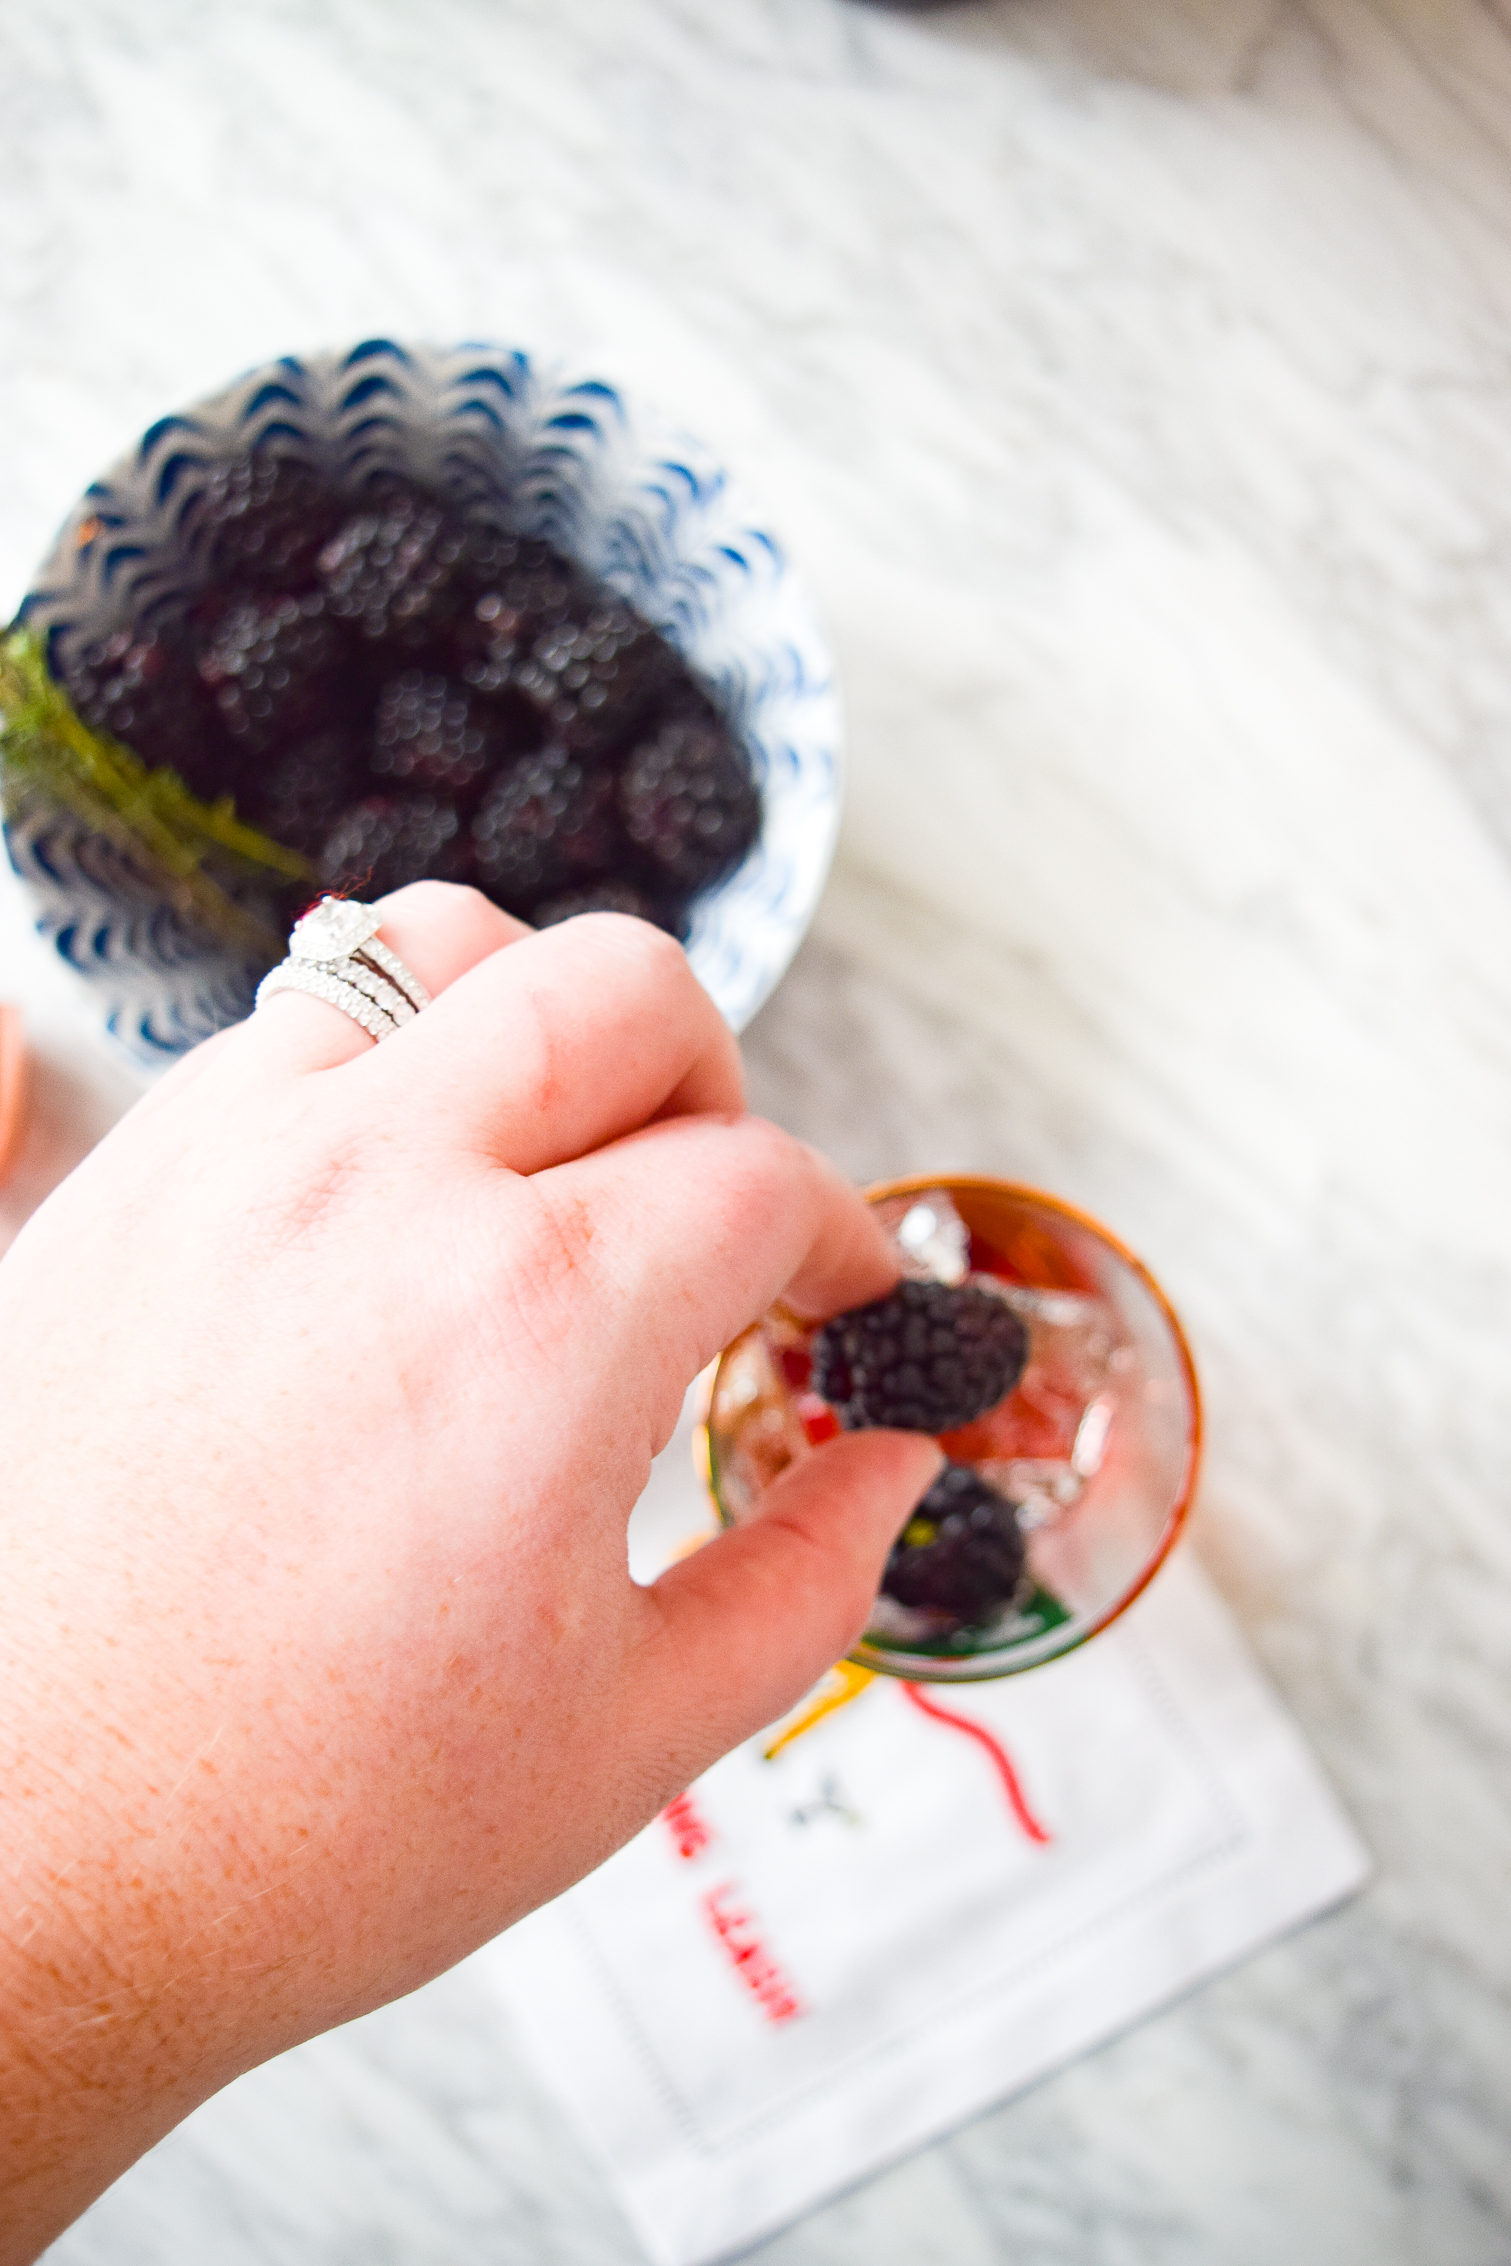 Make yourself a Blackberry & Rosemary Pimms Cup to start you happy hour in style! Their the perfect weekend sip or brunch cocktail. So fresh and tasty!